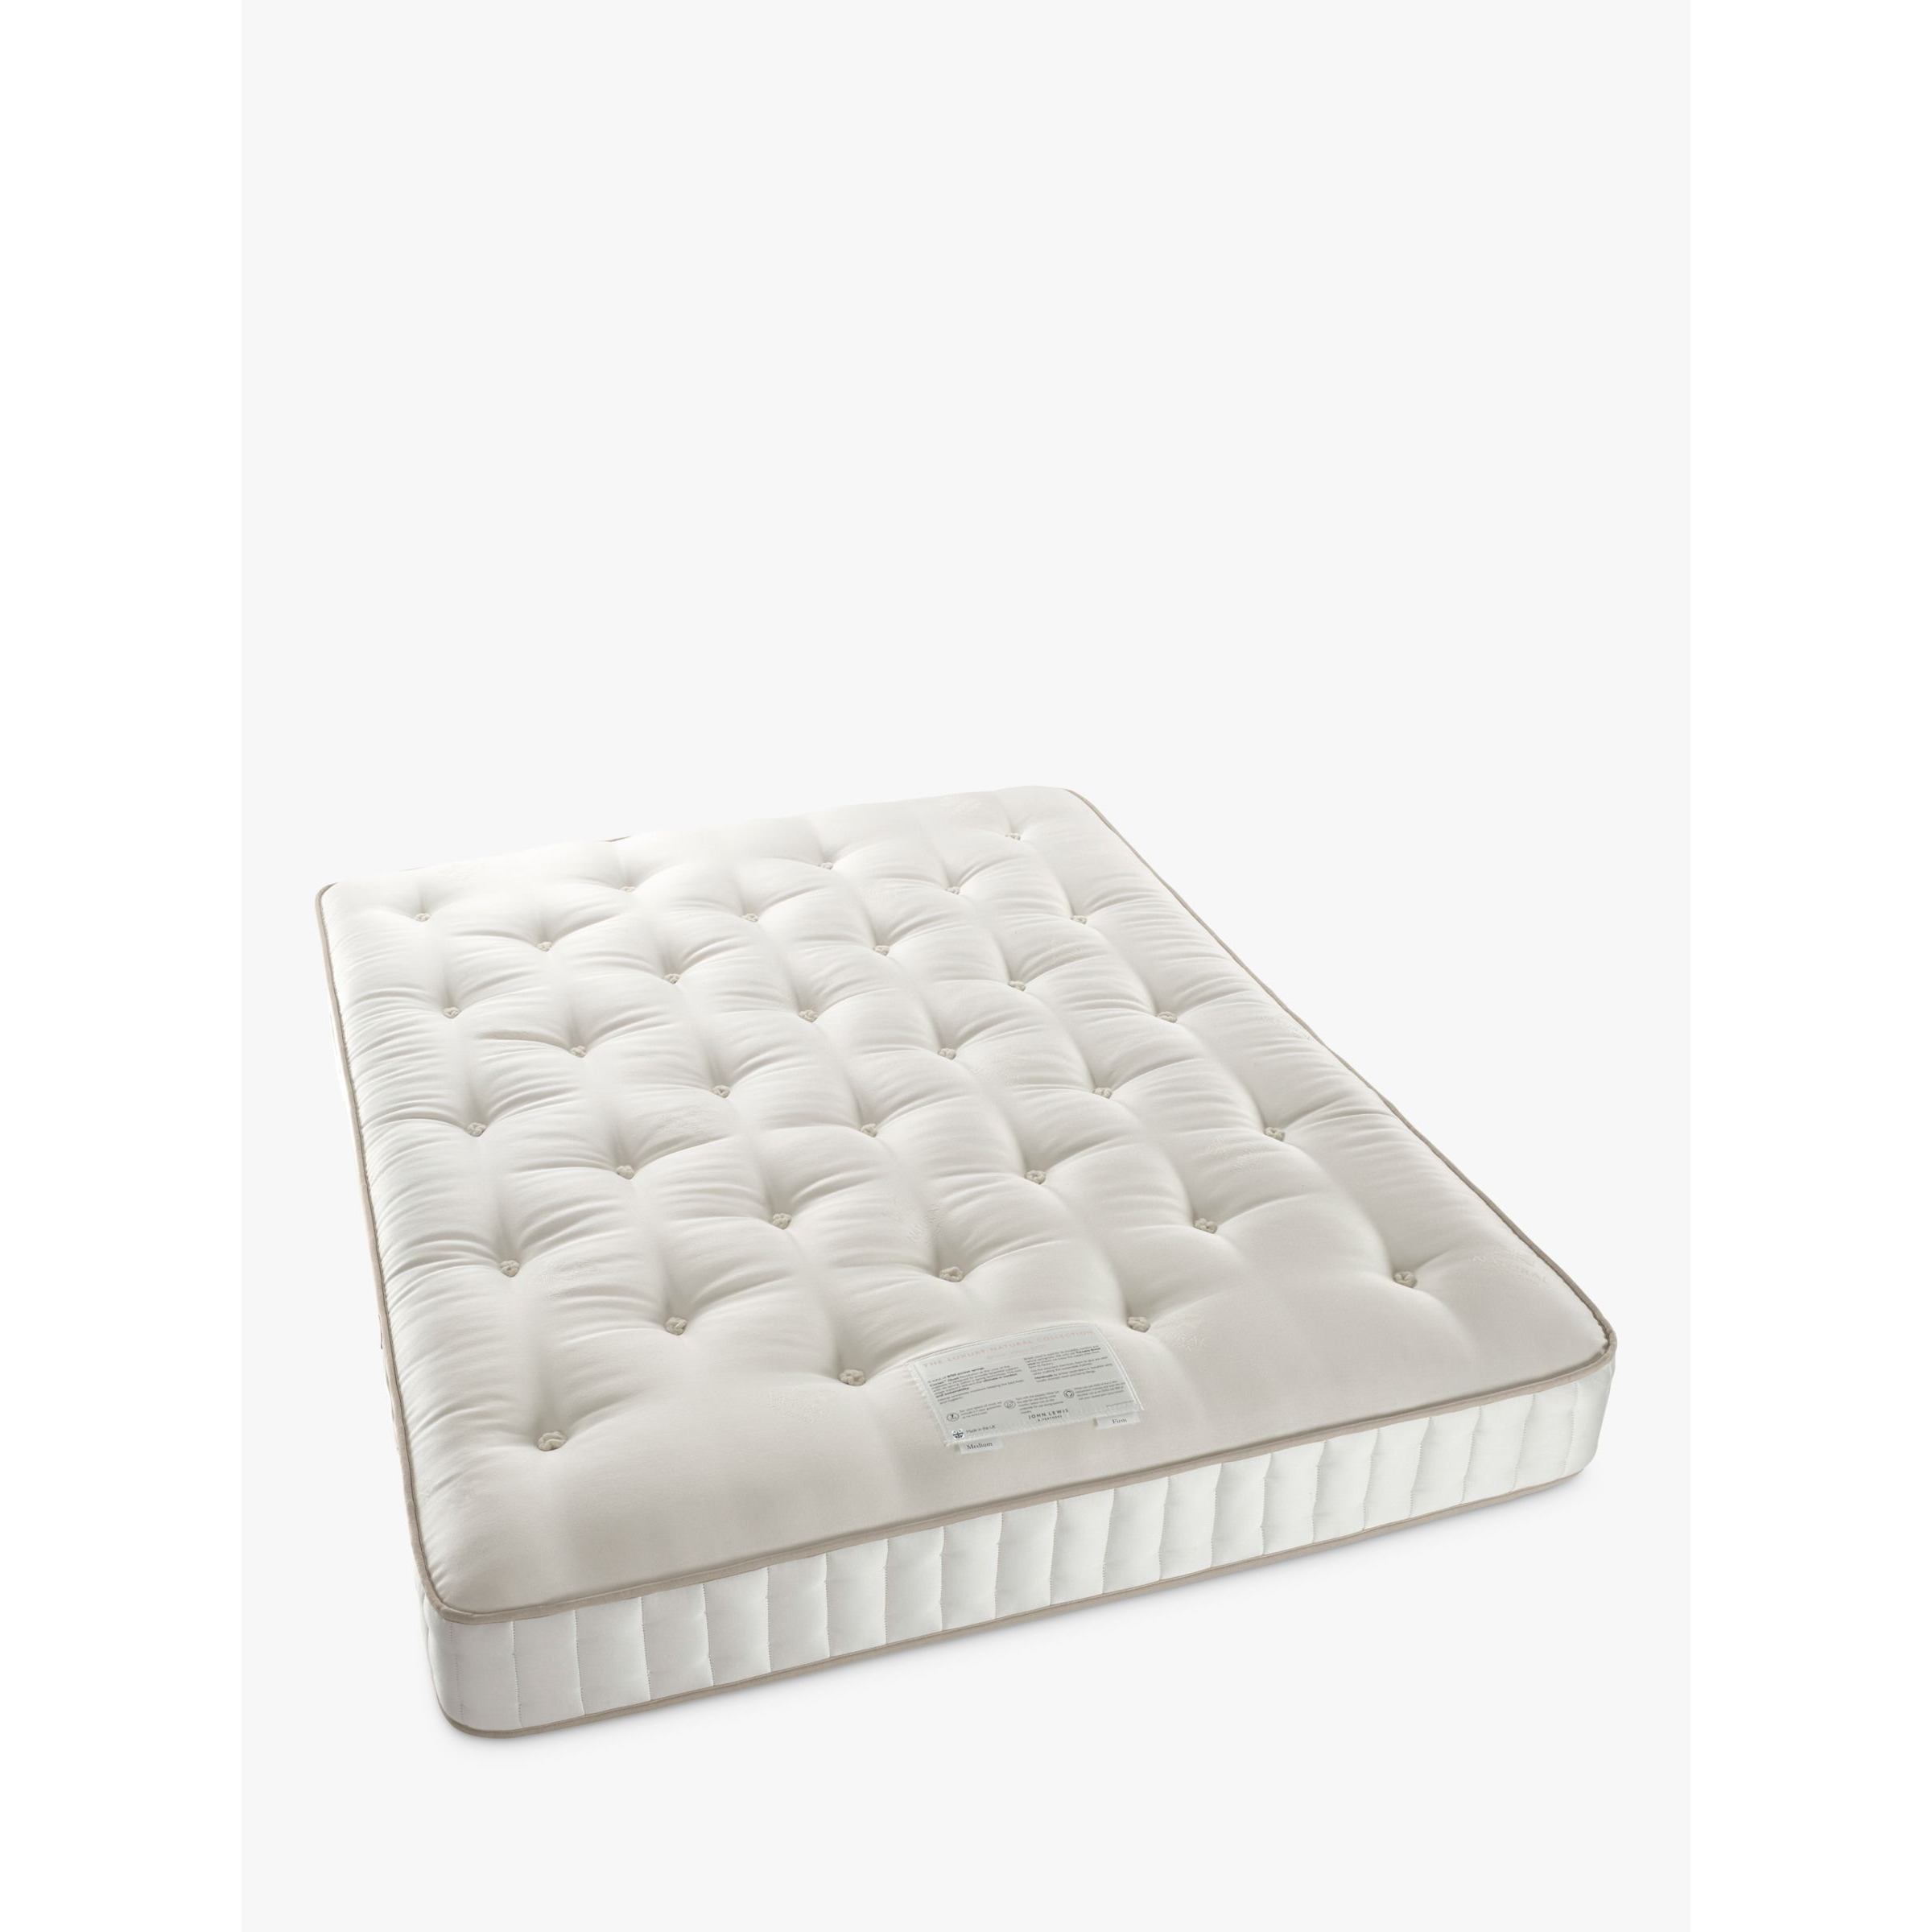 John Lewis Luxury Natural Collection Egyptian Cotton 5750, Small Double, Regular Tension Pocket Spring Mattress - image 1